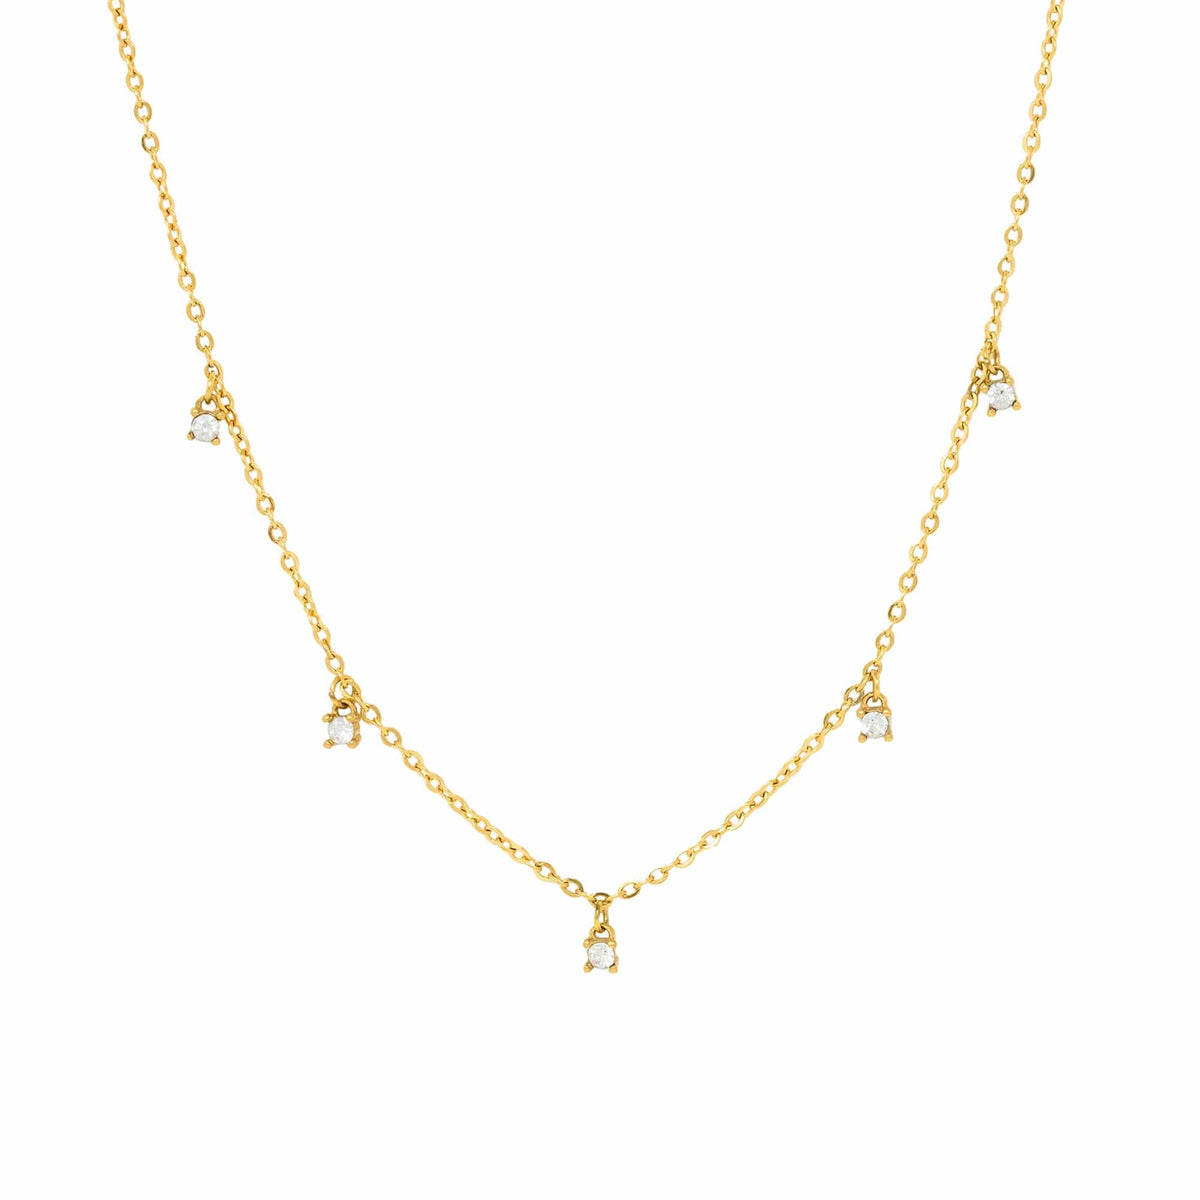 BohoMoon Stainless Steel Pietra Necklace Gold